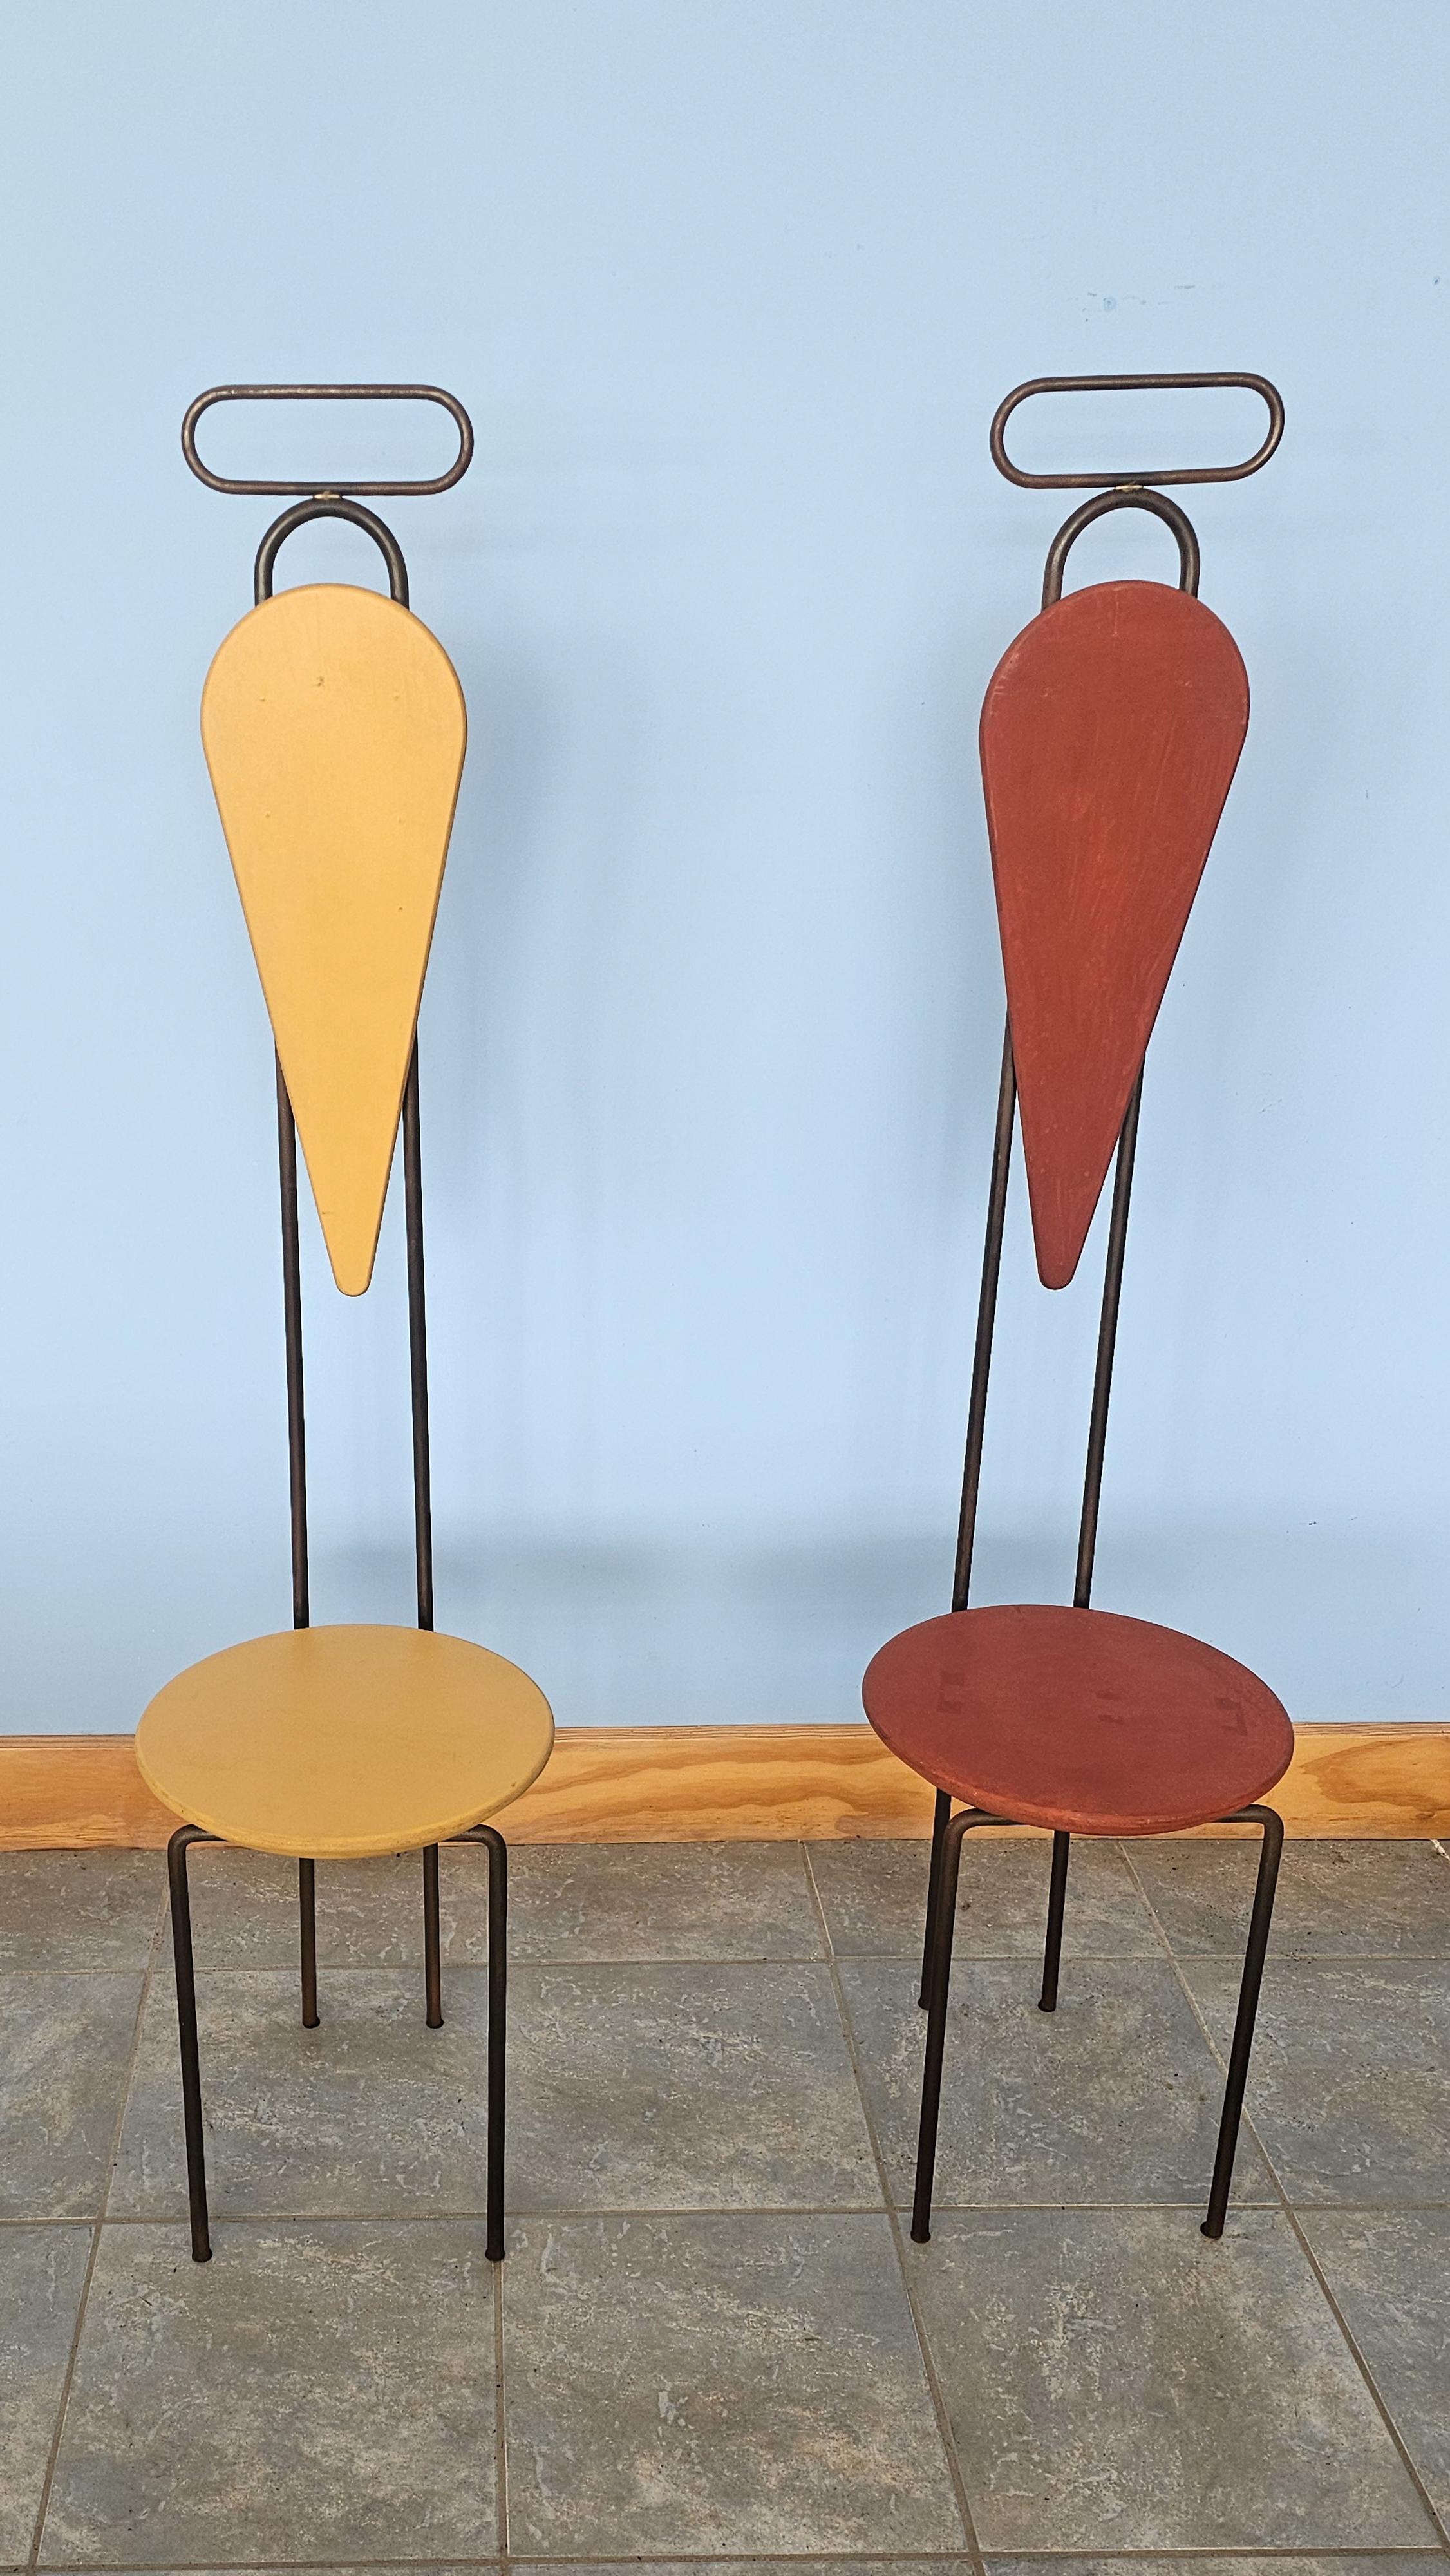 Krish Ruhs, an American artist, designed these two chairs for a solo exhibition sponsored by Cappellini and presented at their Carugo showroom in 1990. Craftsmanship, inspiration from nature, and the use of sculptural materials are essential